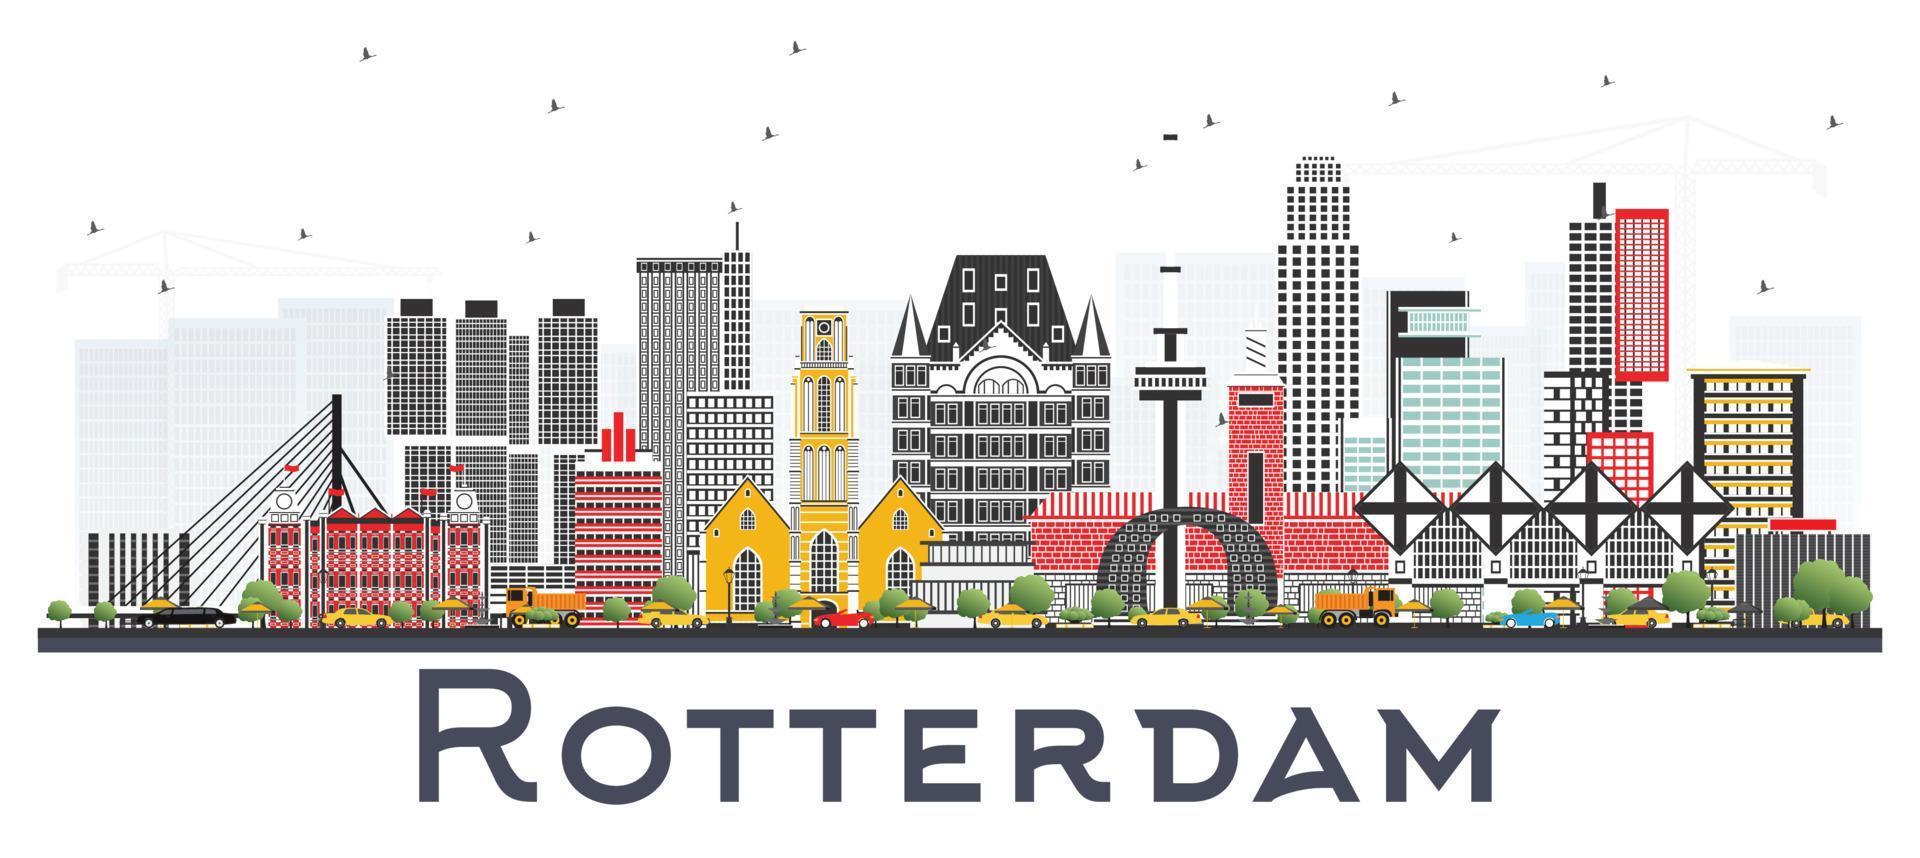 Rotterdam Netherlands Skyline with Gray Buildings Isolated on White Background. vector